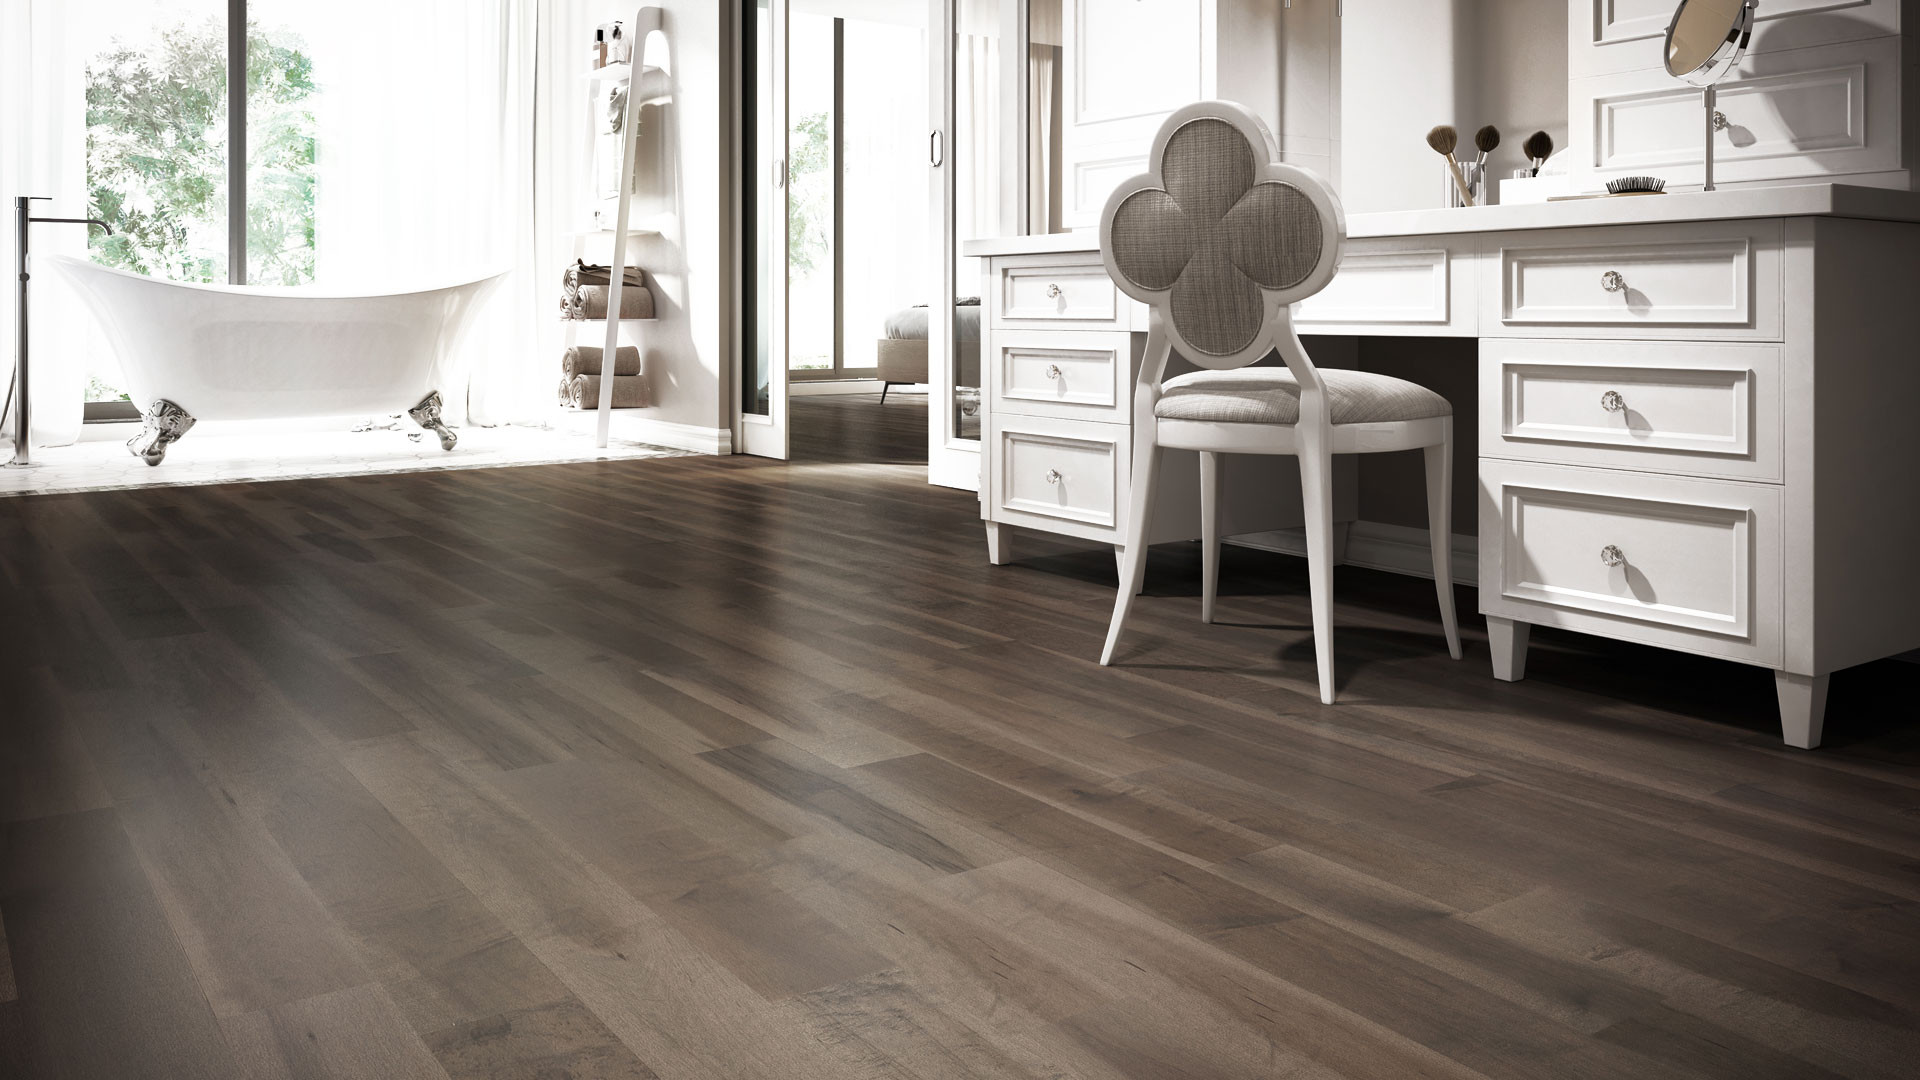 15 attractive Finishing Hardwood Floors Youtube 2024 free download finishing hardwood floors youtube of 4 latest hardwood flooring trends lauzon flooring with learn more about our pure genius by reading our blog post the smartest hardwood flooring weve ever